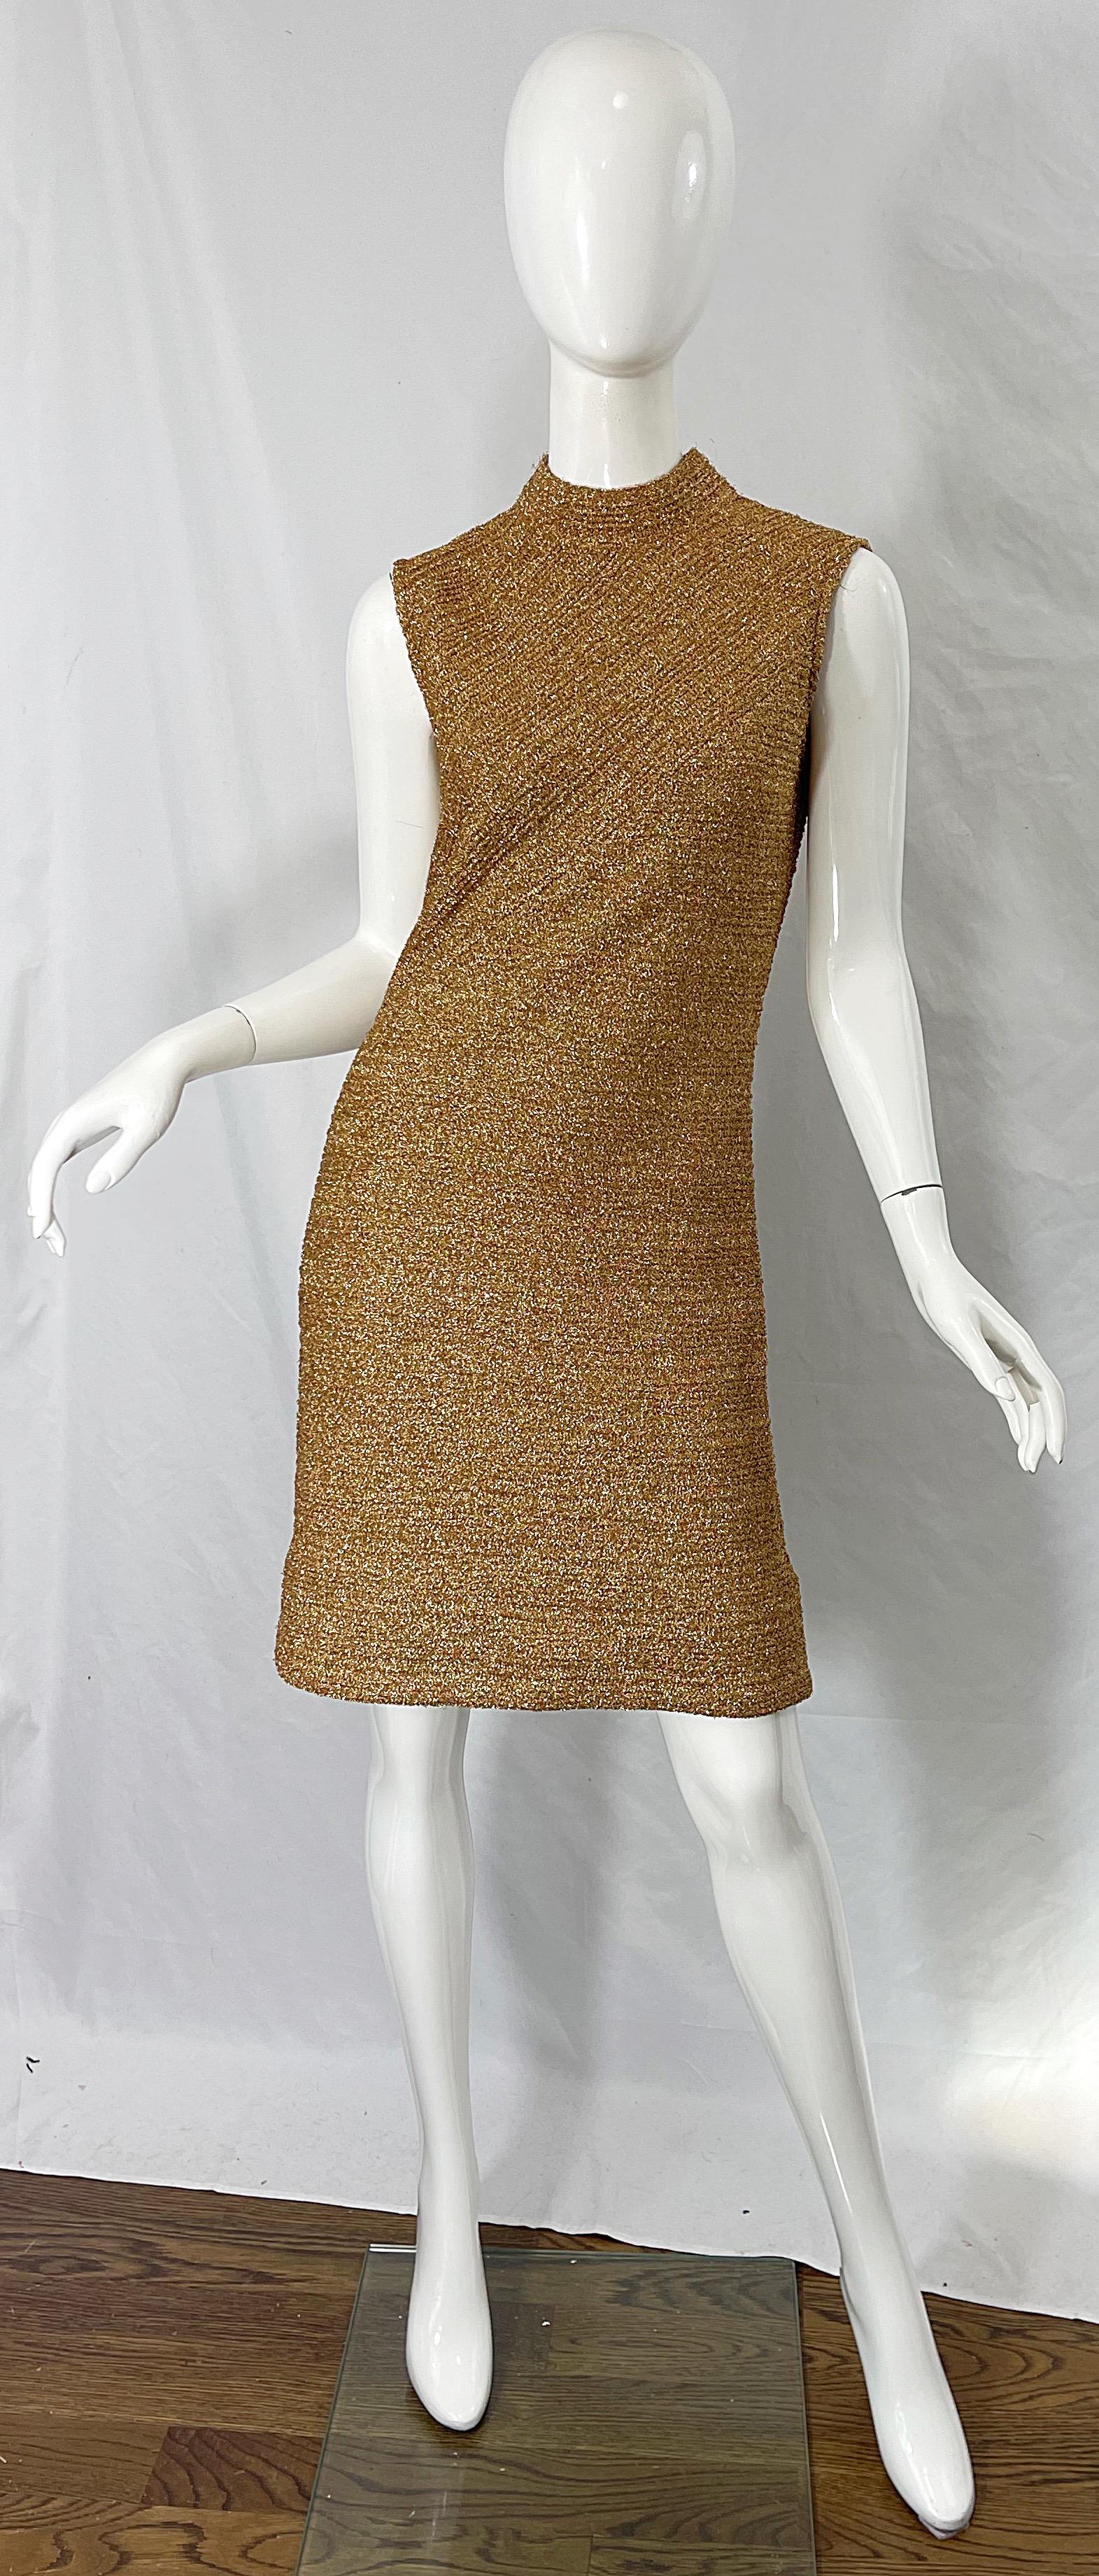 Chic 1960s CABOT gold metallic sleeveless shift dress ! Features a high neck with tailored bodice. 100% metallic yarn offers plenty of stretch. Hidden metal zipper up the back with hook-and-eye closure. 
Perfect for any day or evening event. Pair